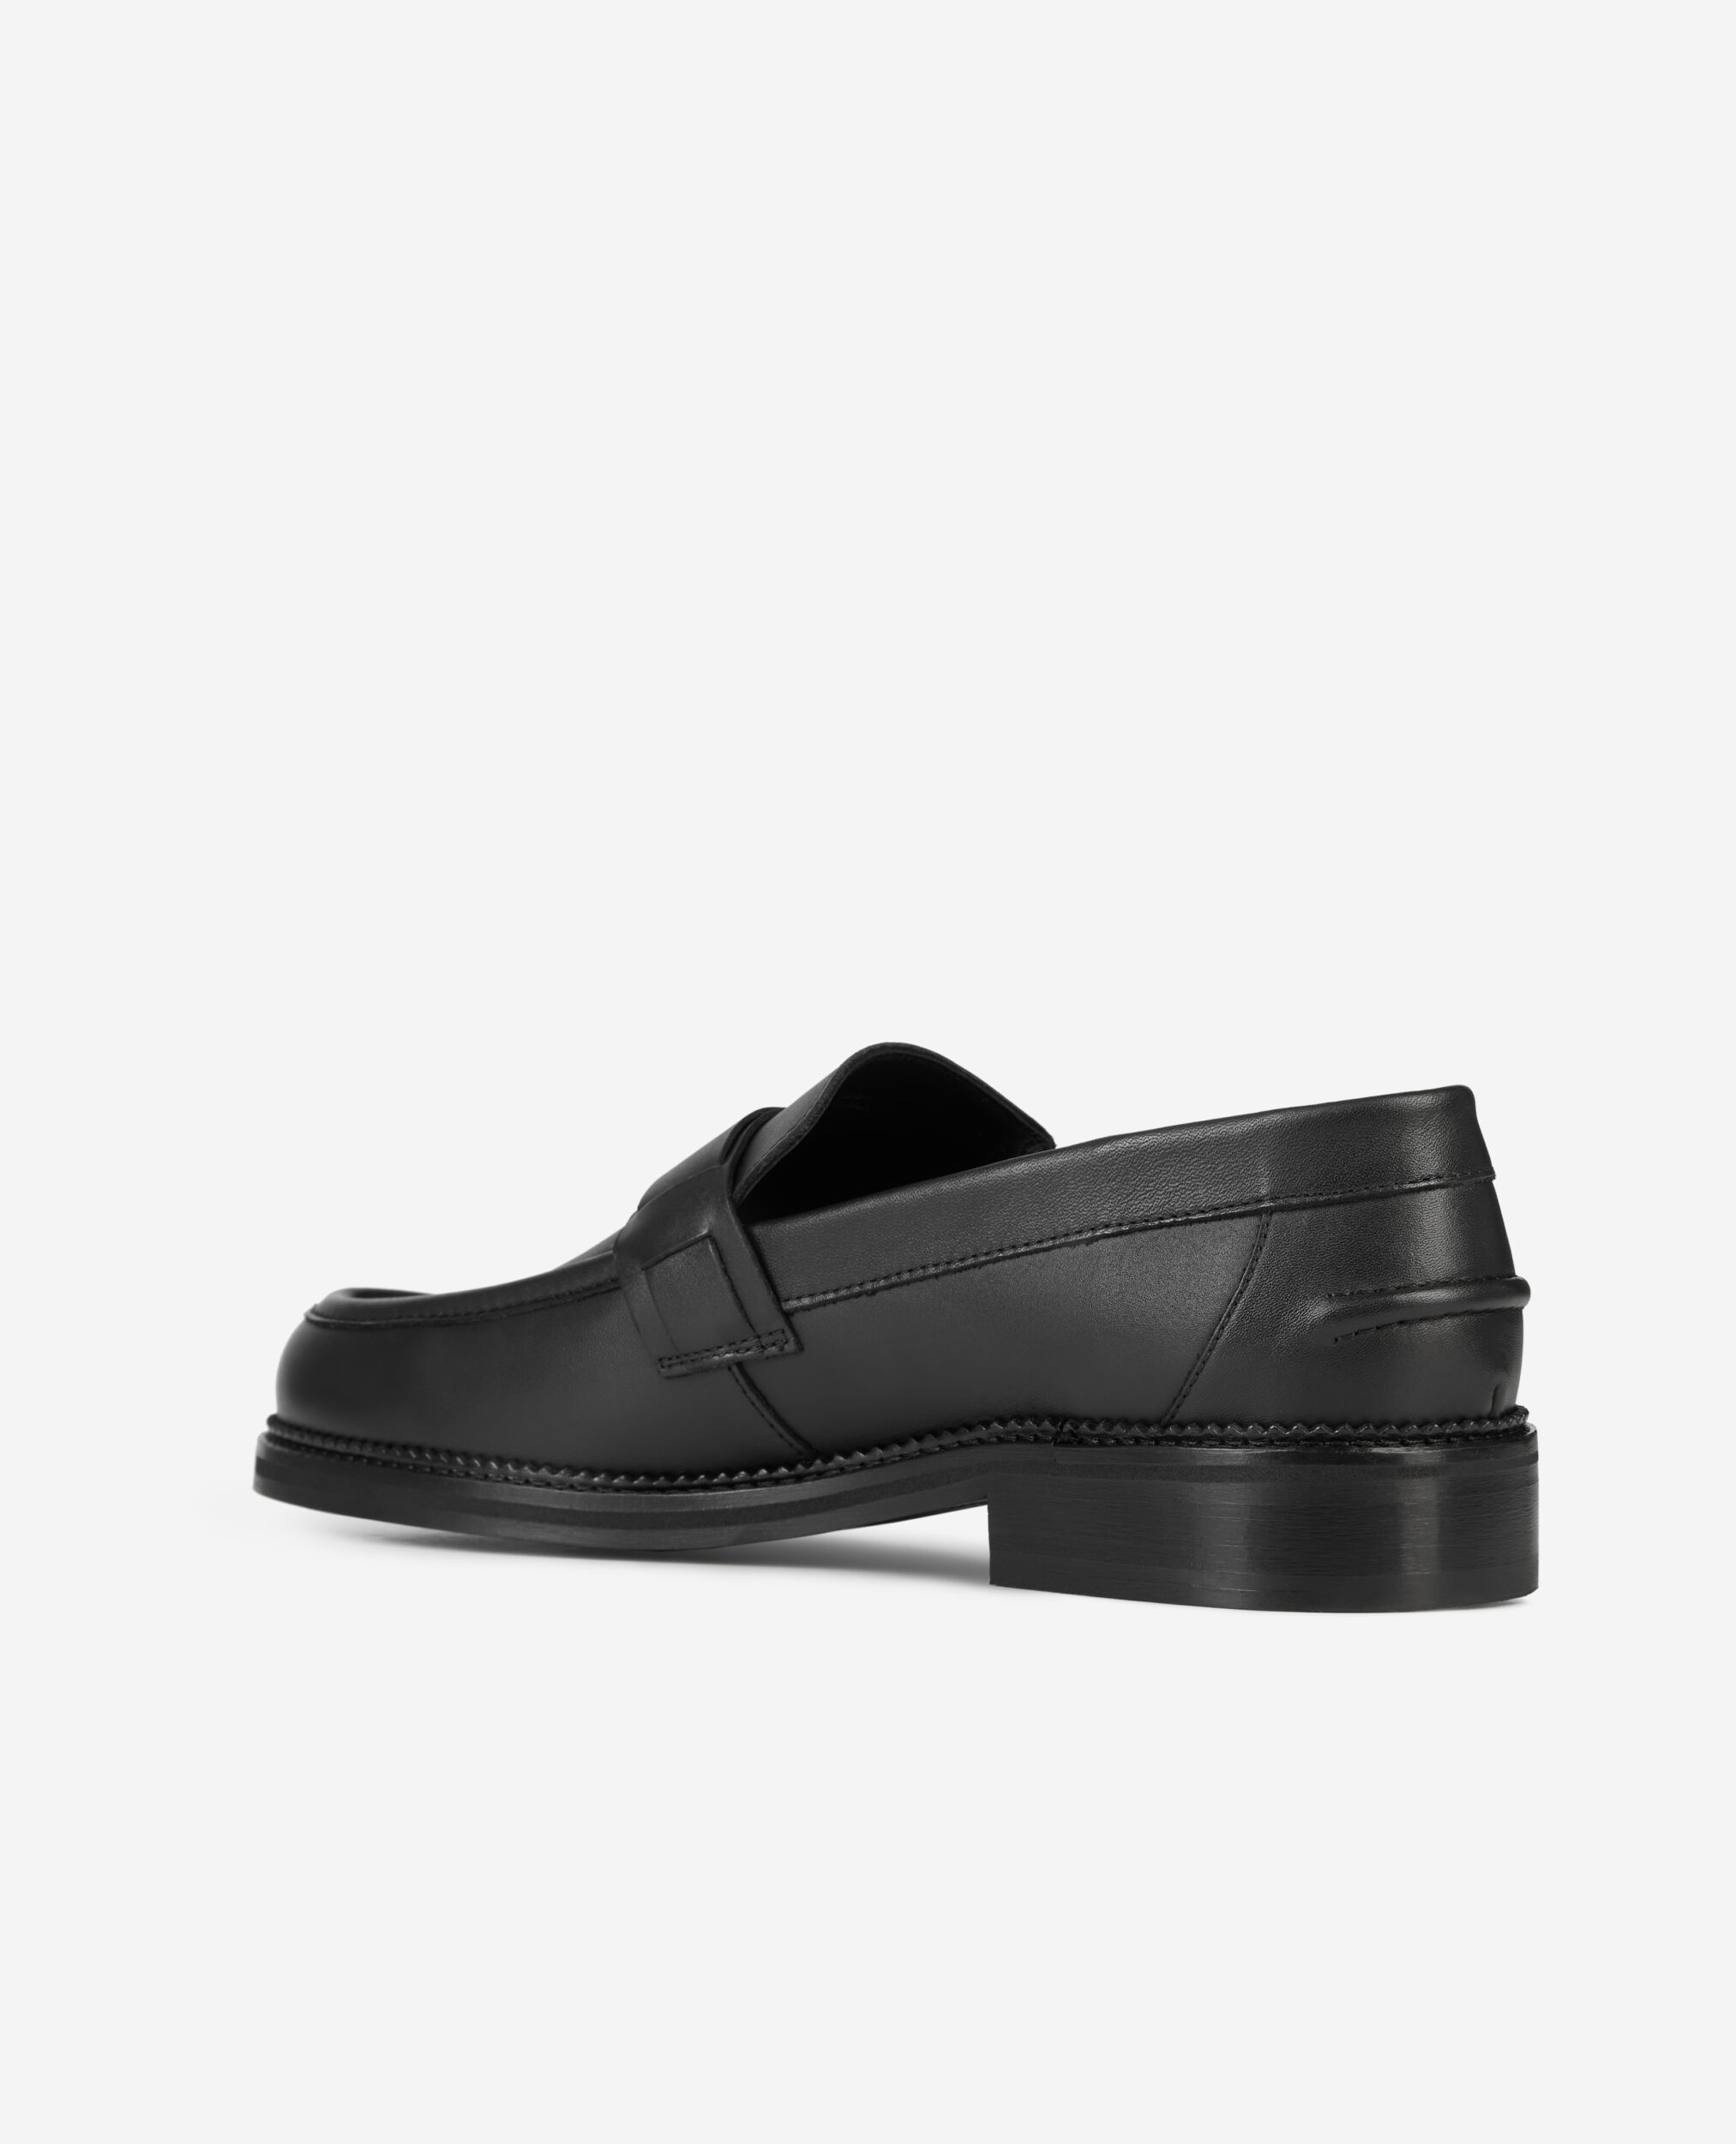 Black leather loafers with metallic inserts, BLACK, hi-res image number null